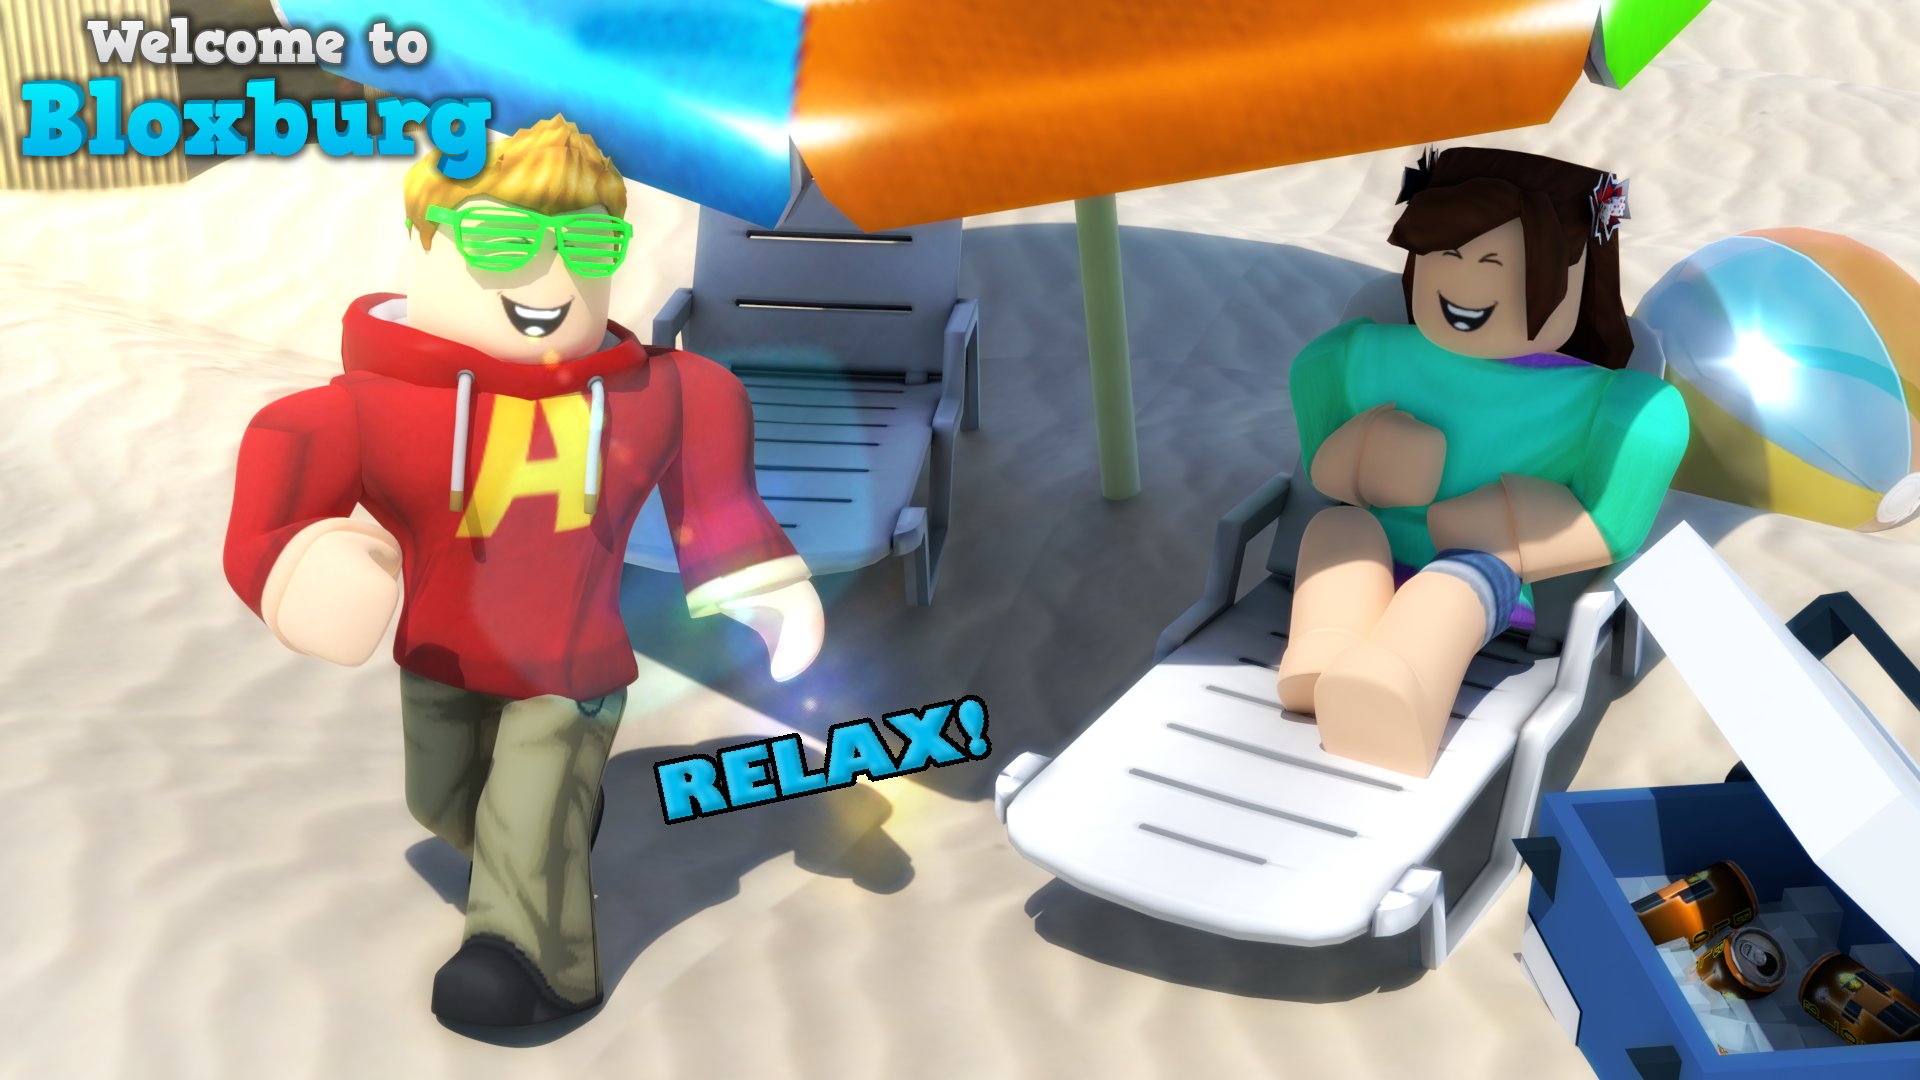 Buluk On Twitter Here S A Fan Submission Thumbnail For Rbx Coeptus S Welcome To Bloxburg Game Still Working On The Other 2 But I Doubt That Coeptus Would Even See It Lol Roblox Robloxart - coeptus rbx coeptus twitter